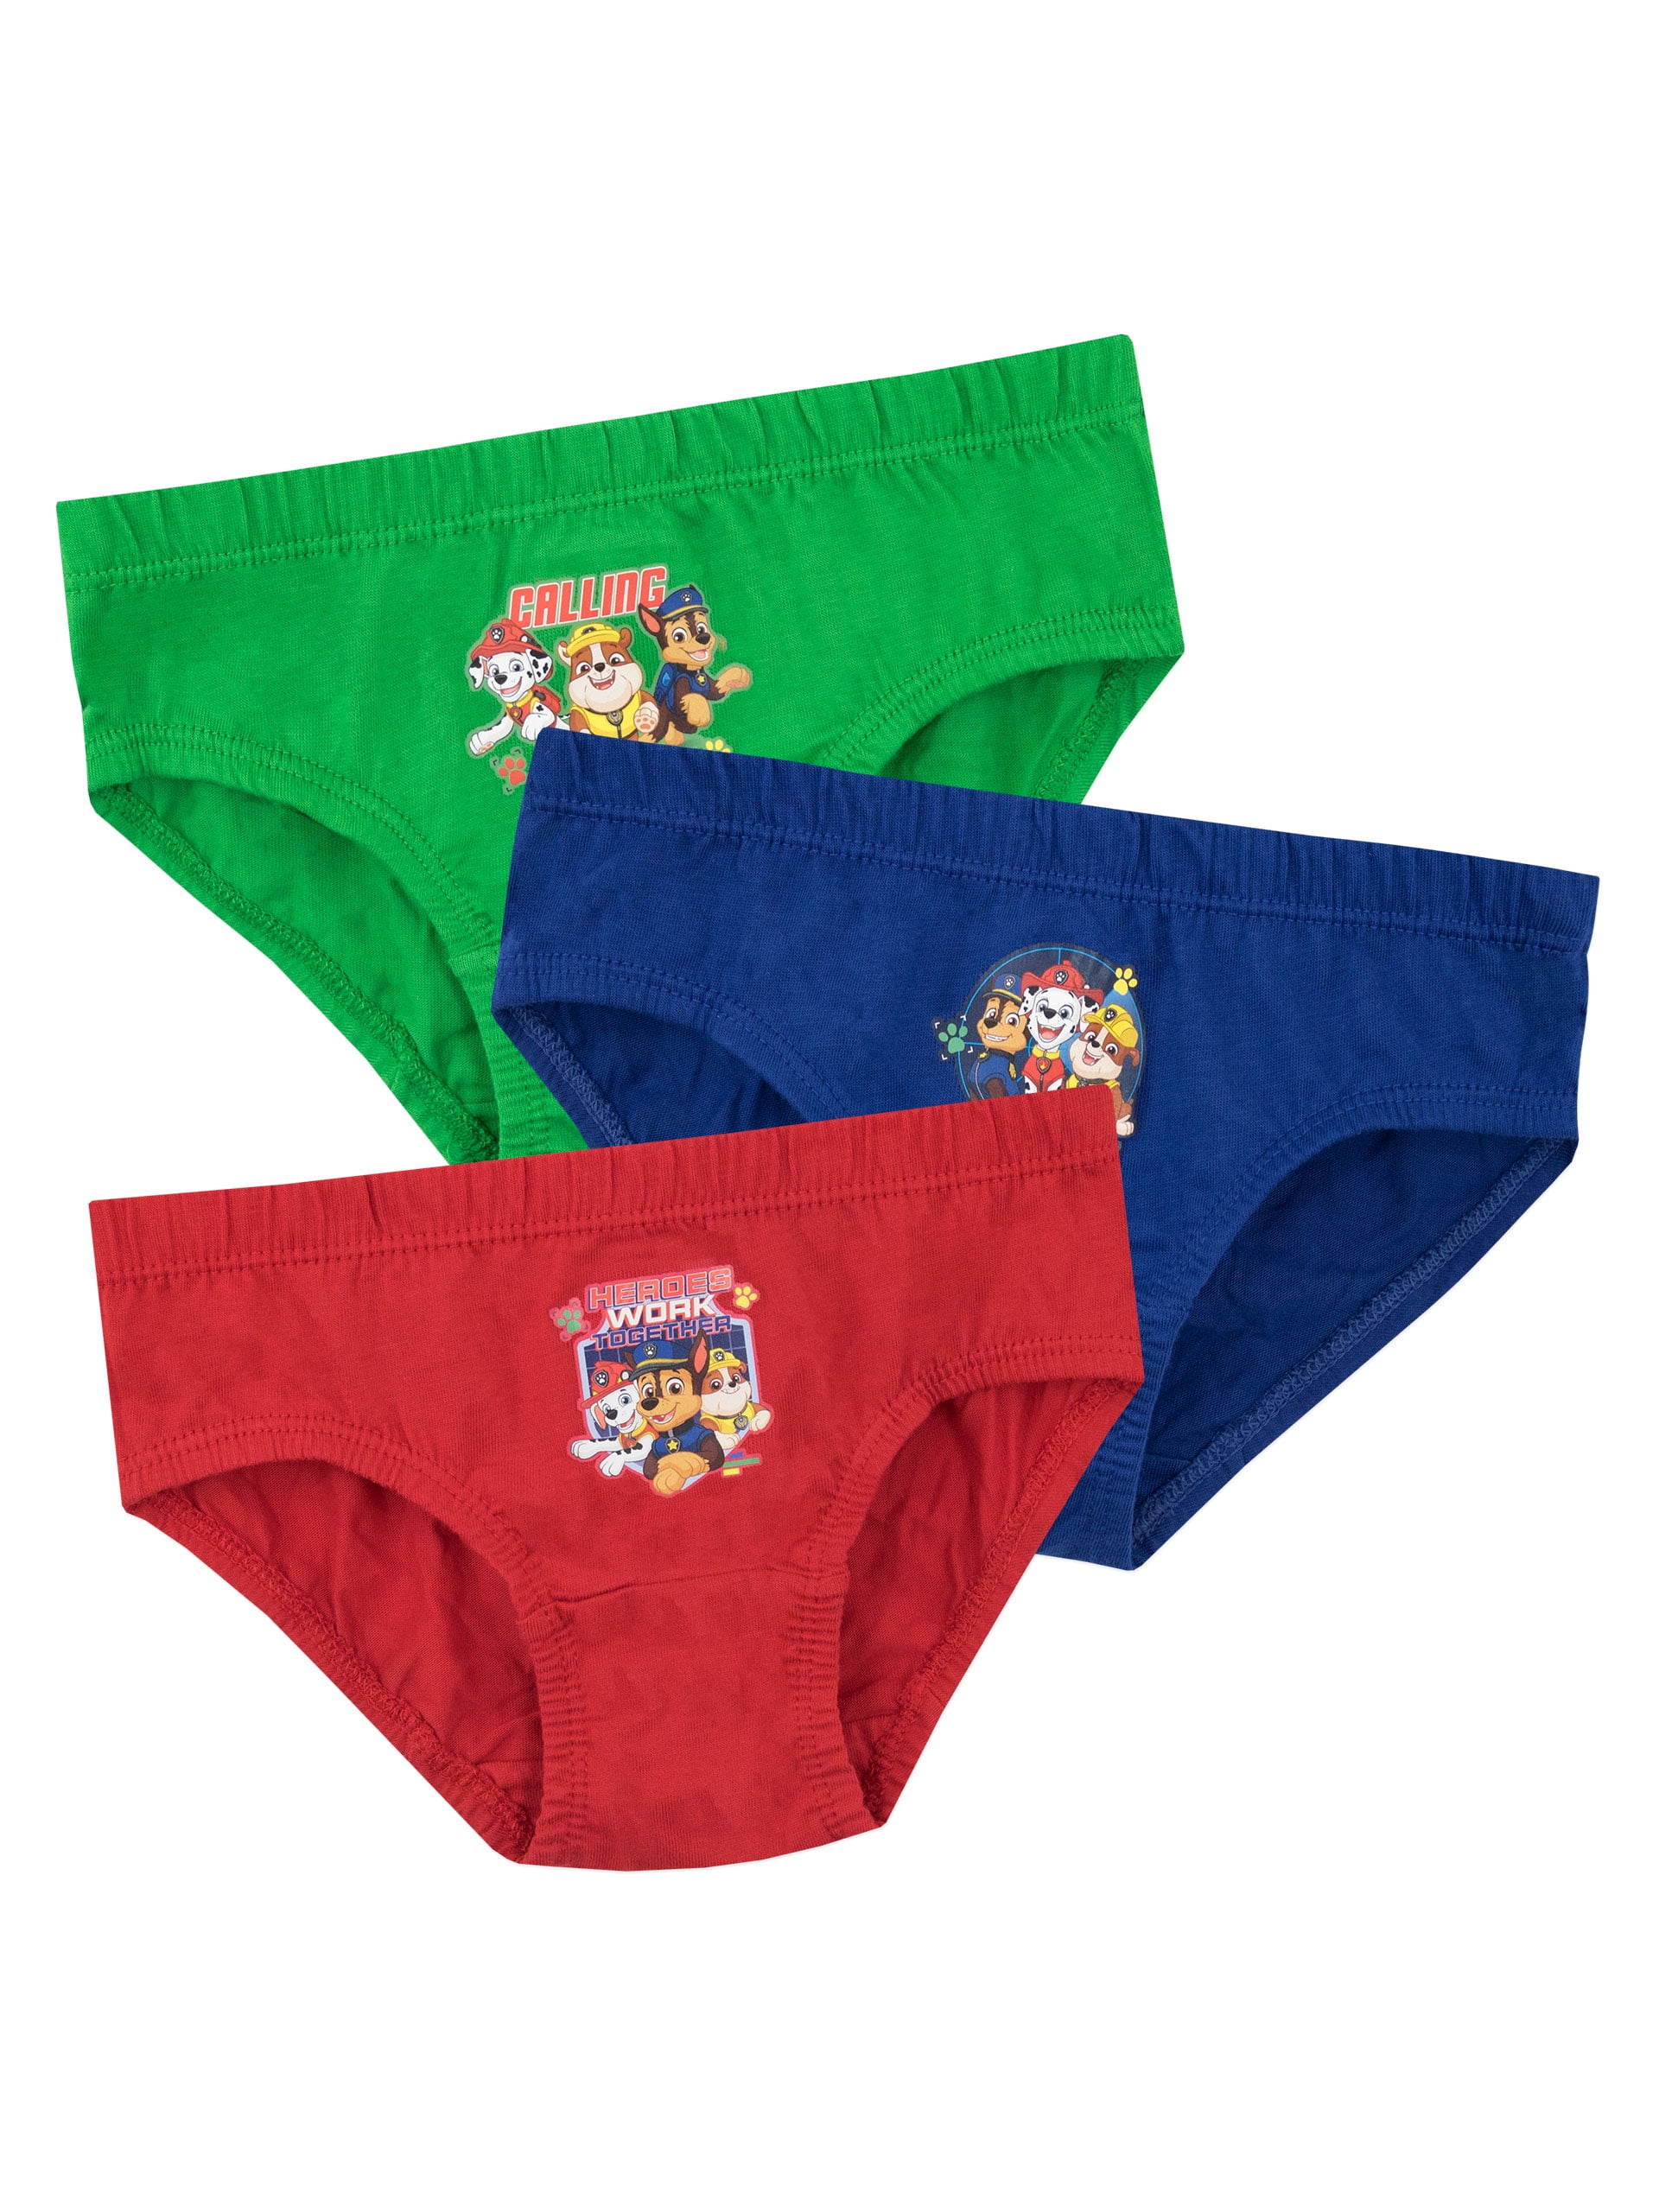 Find more 6pr 4t Paw Patrol Underwear for sale at up to 90% off